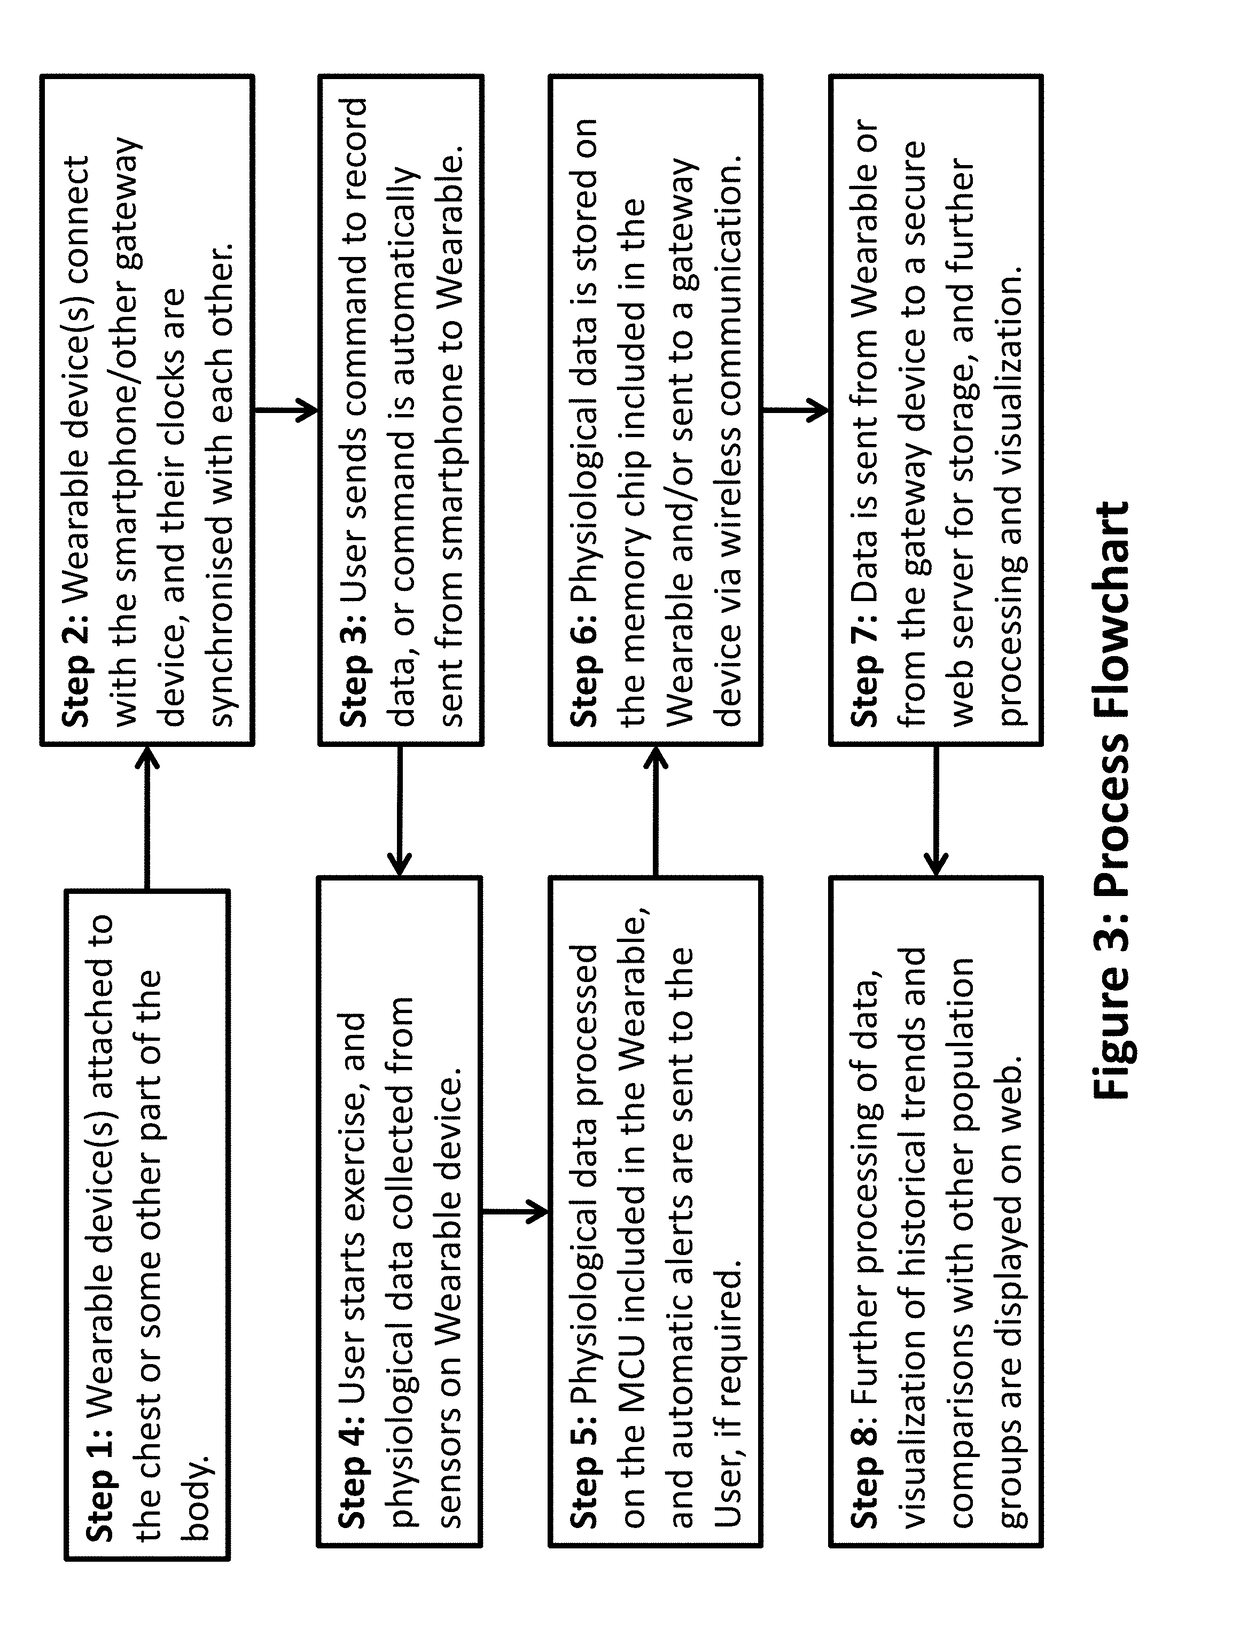 Method and system for continuous monitoring of health parameters during exercise